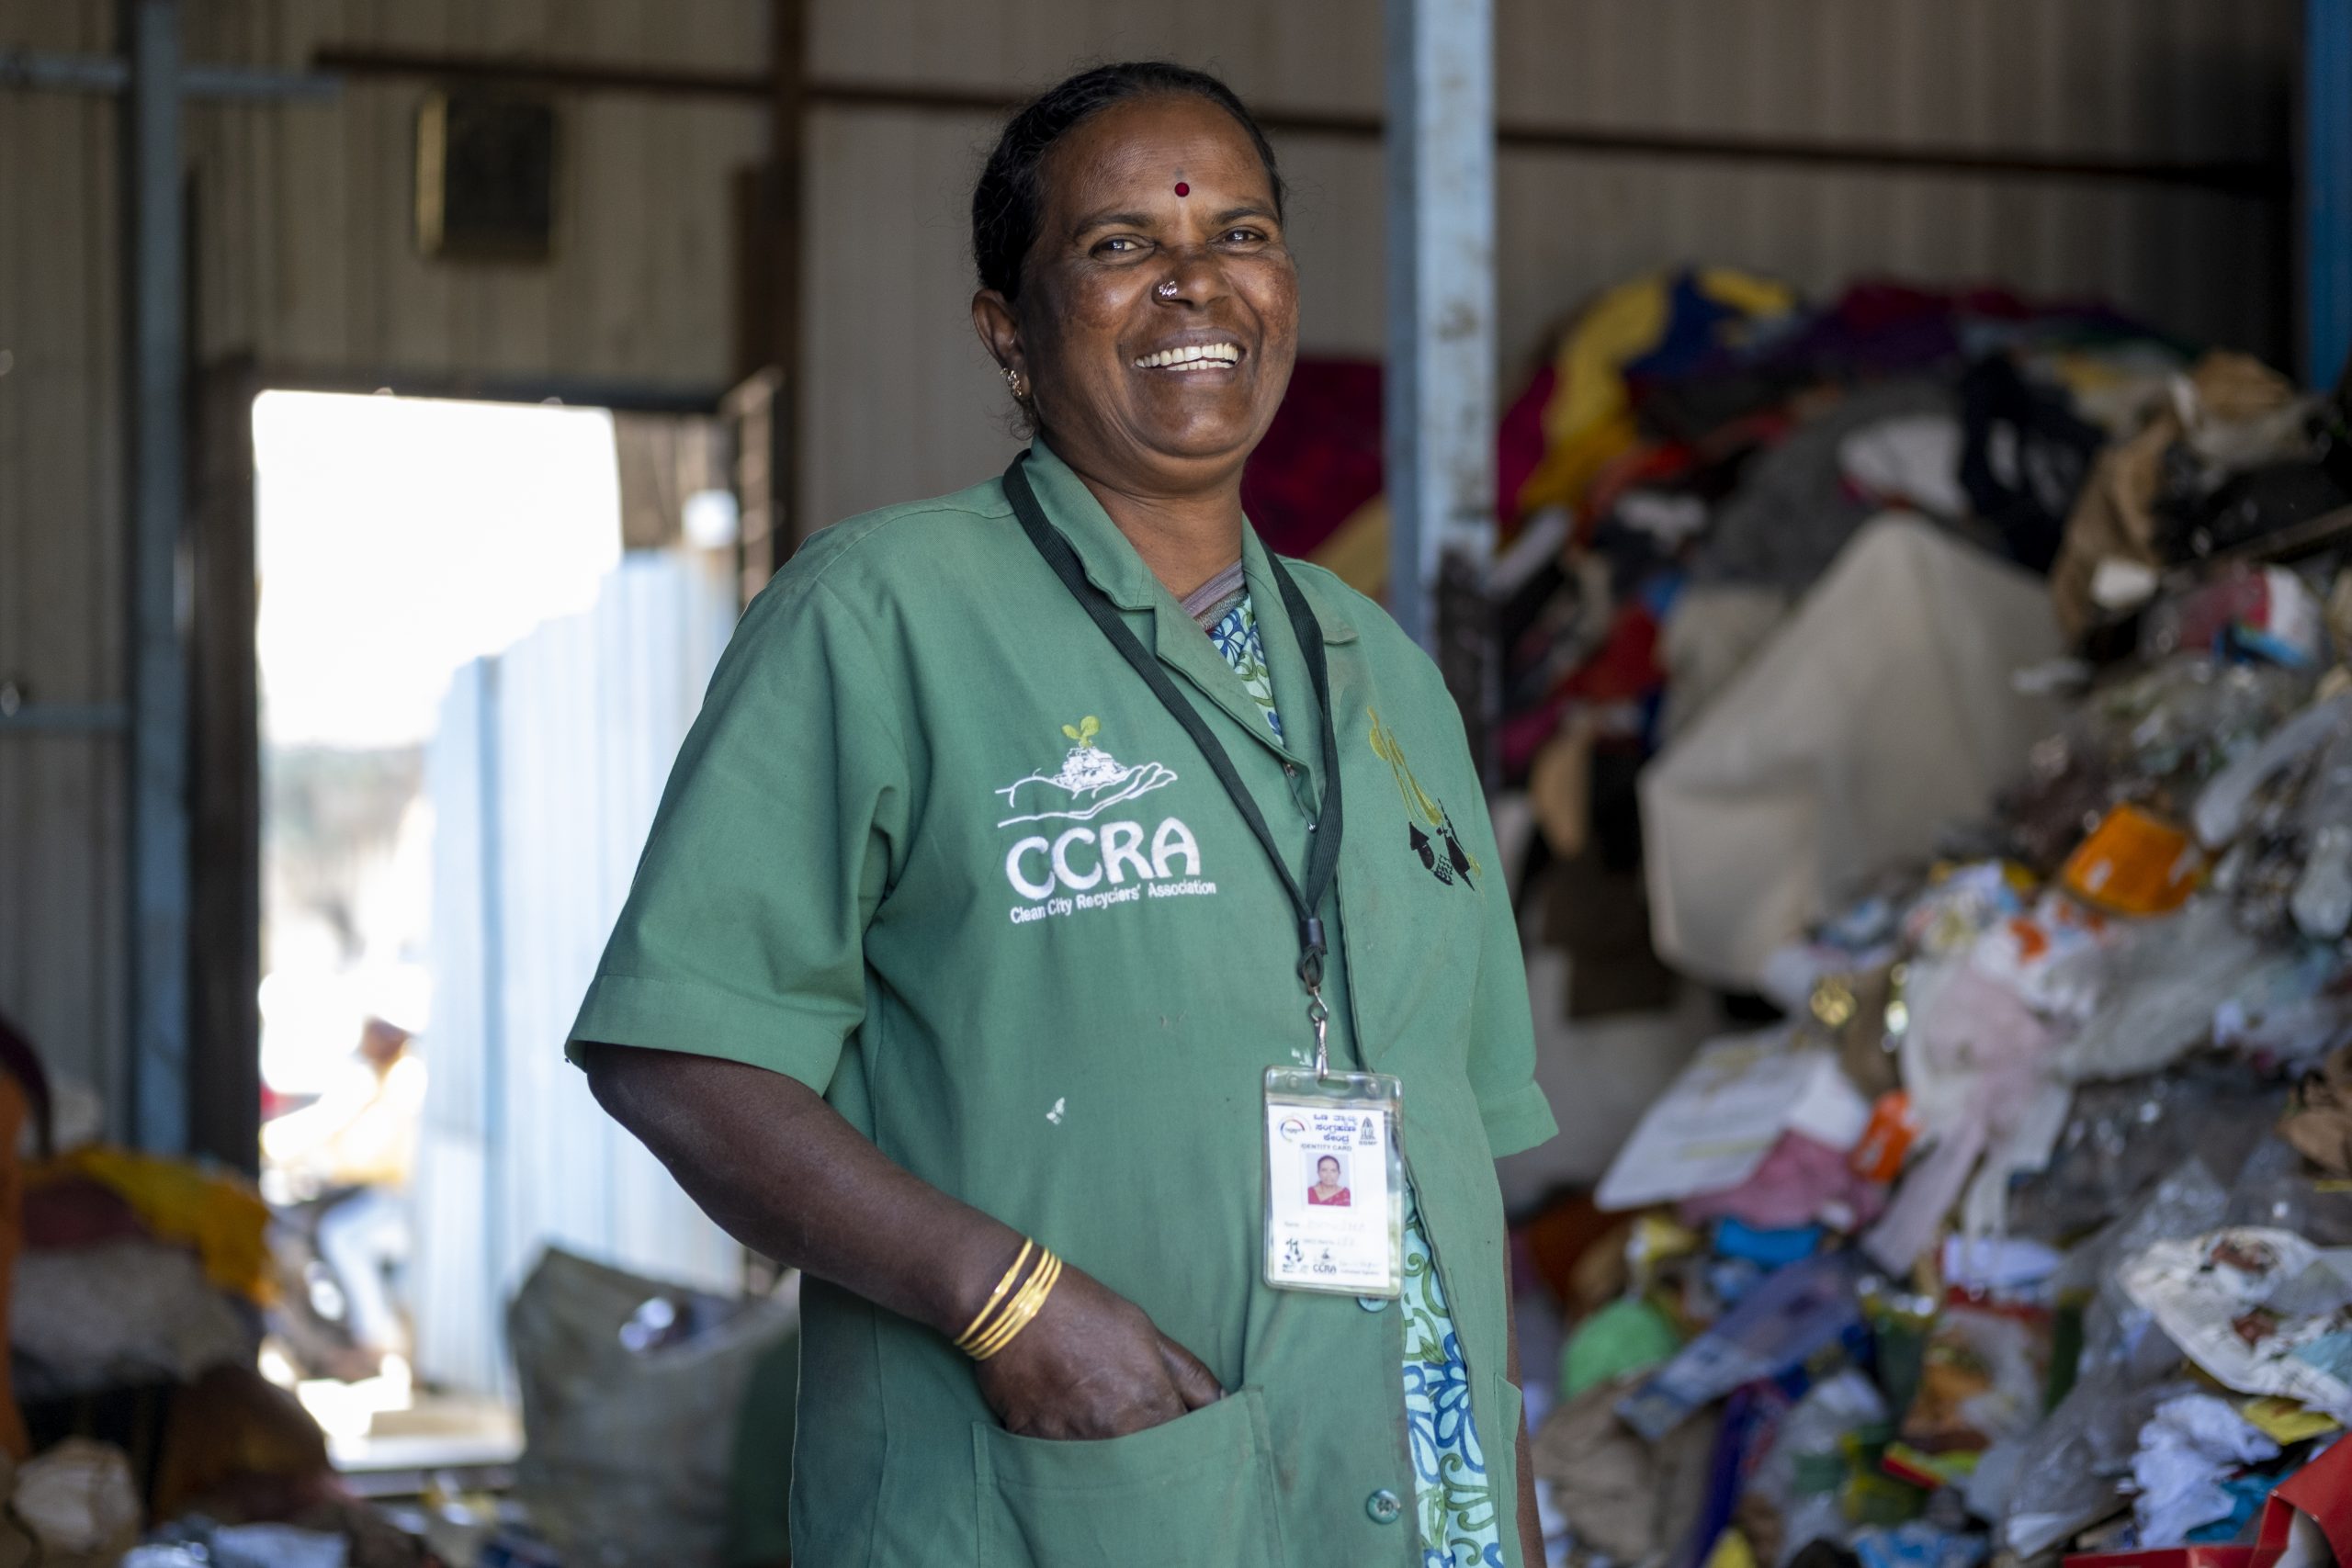 Kumudha, one of the dry waste sorters, at Dry Waste Collection Centre, JP Nagar, Bangalore.